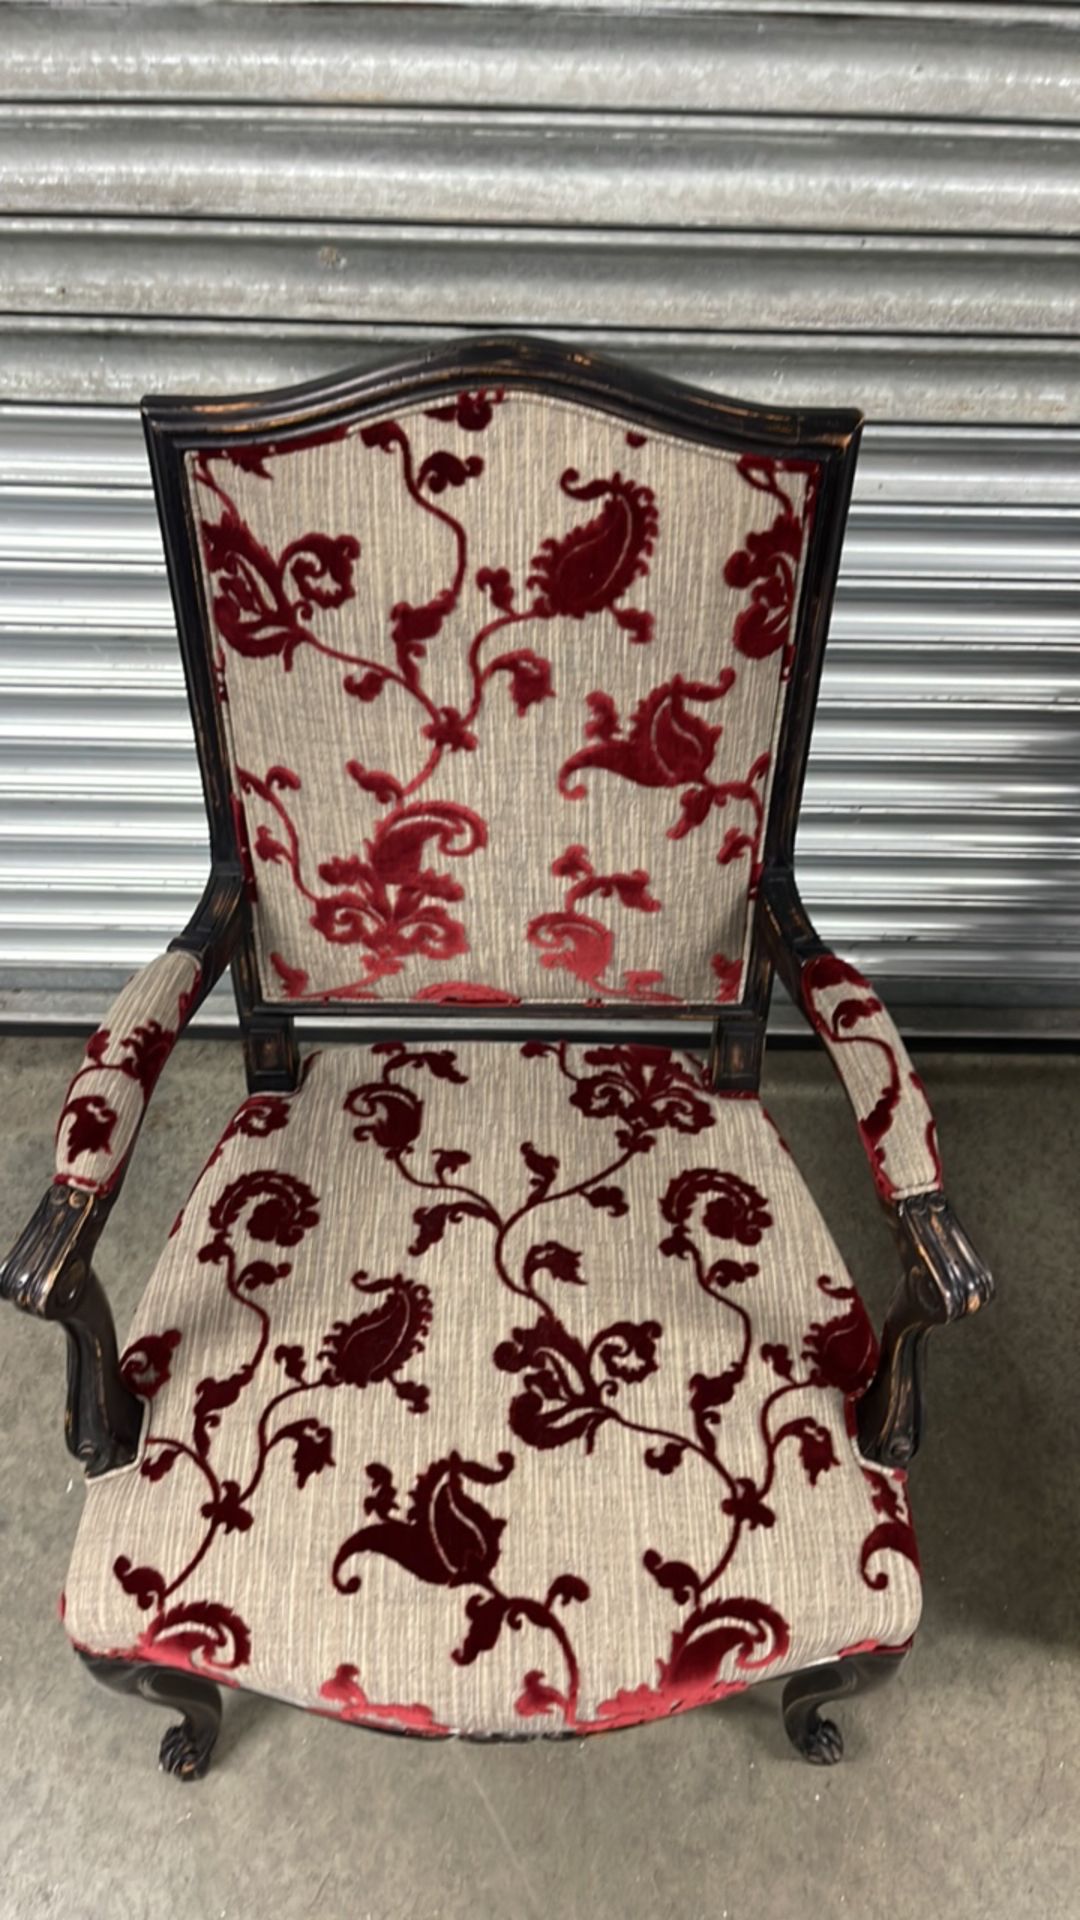 Pair of Roche Bobois Floral Dining Chairs with Arms RRP £650 Per Chair - Image 4 of 8